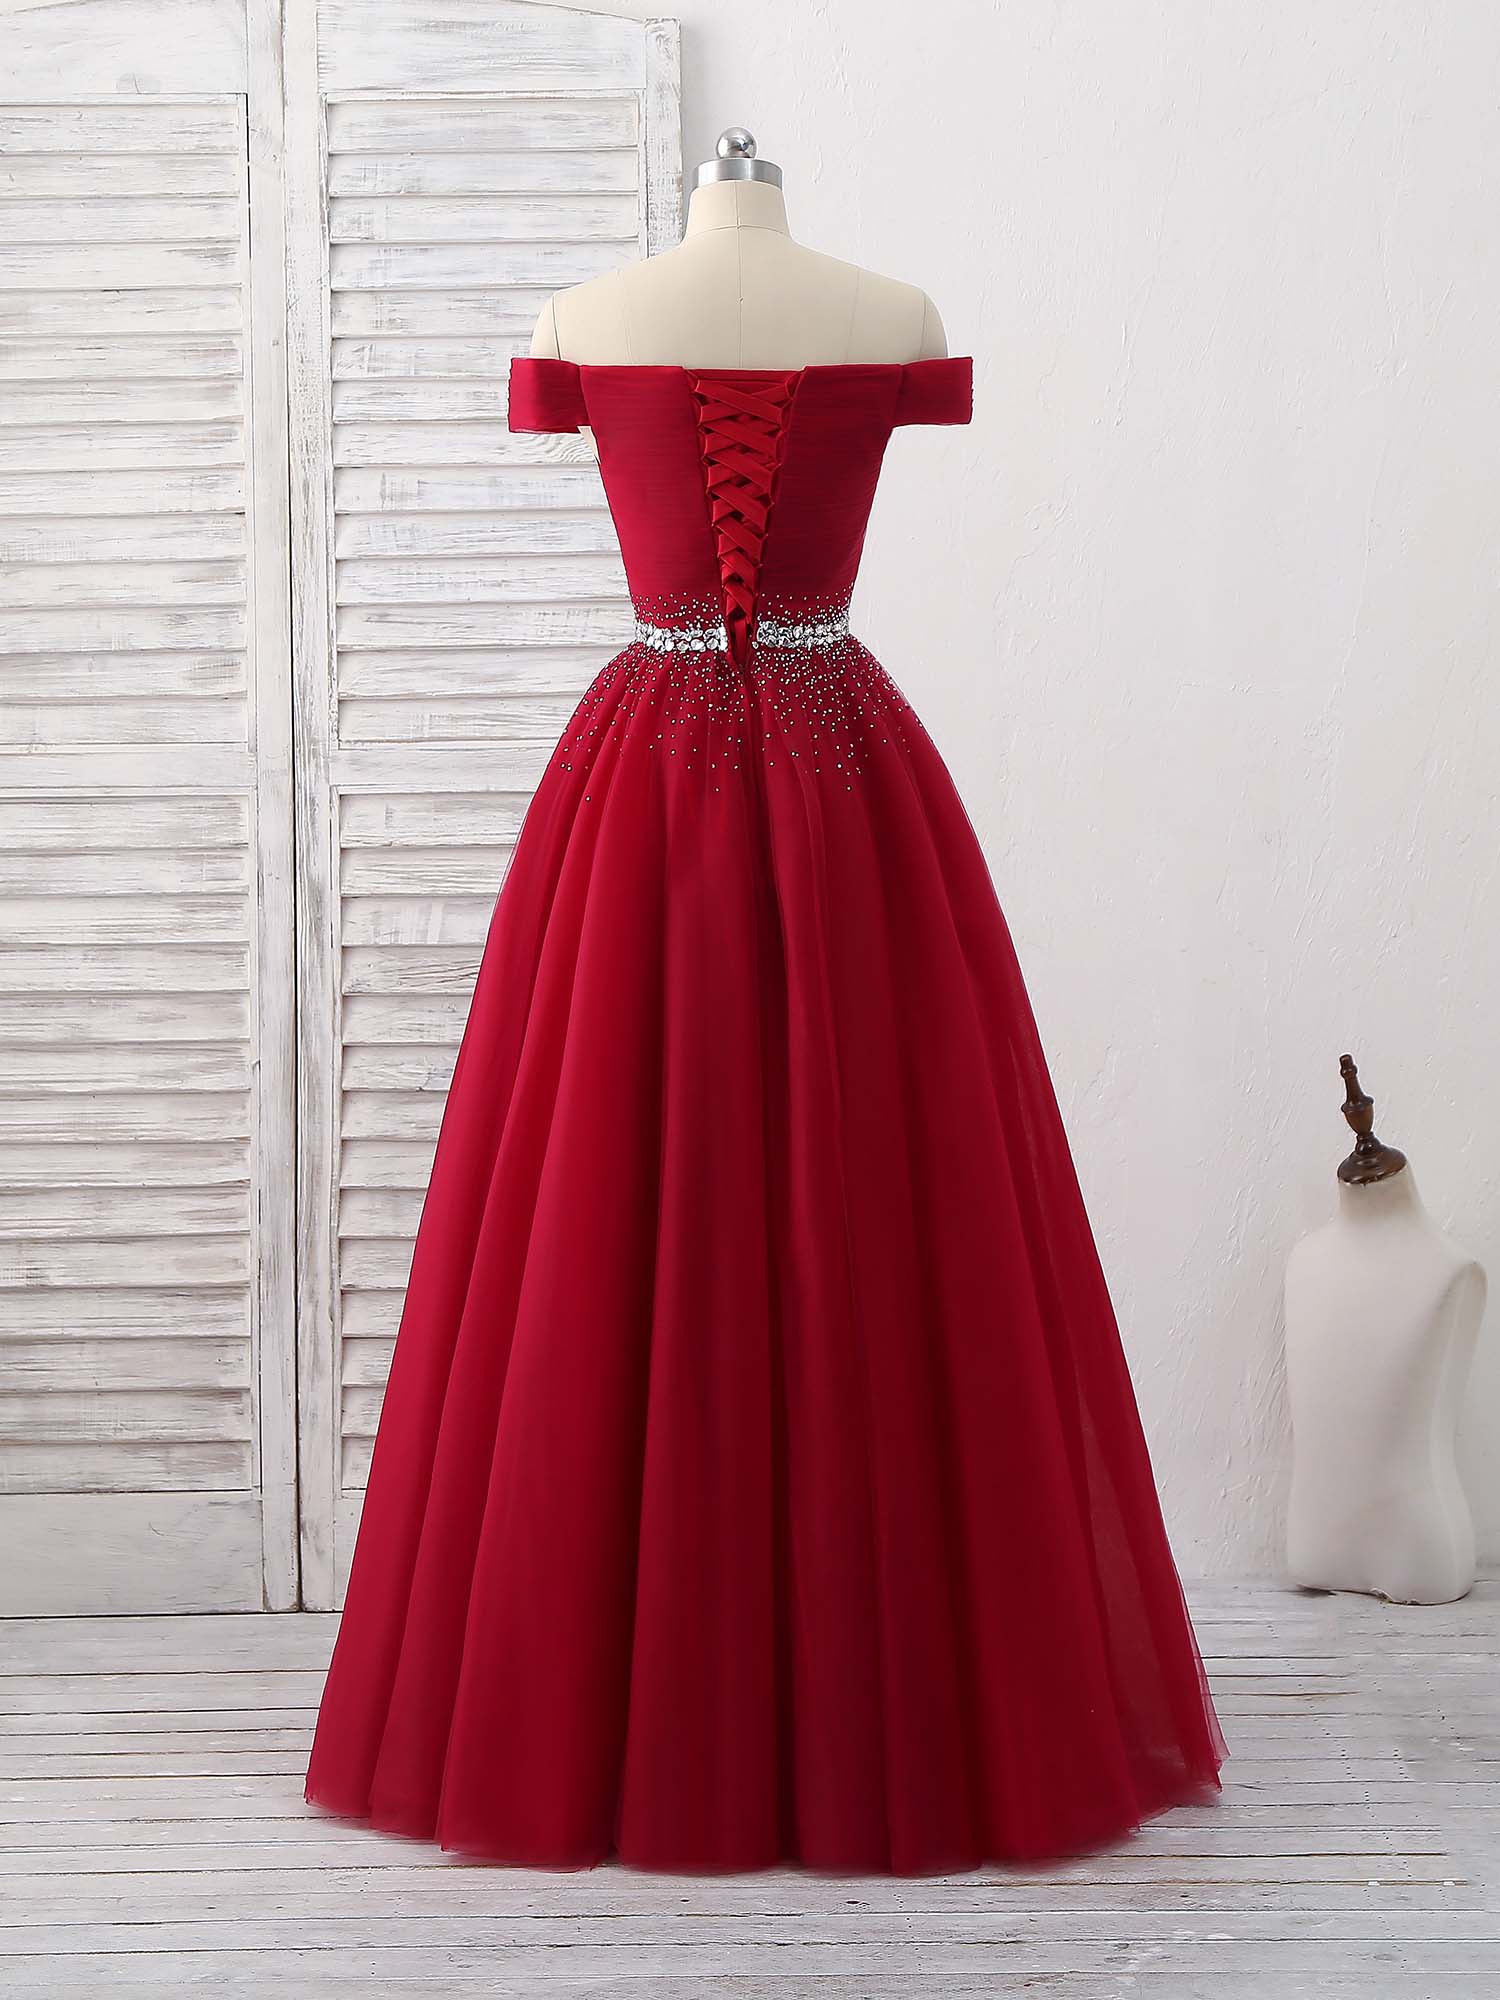 Prom Dresses Floral, Burgundy Tulle Sweetheart Neck Long Prom Dress, Burgundy Evening Dress